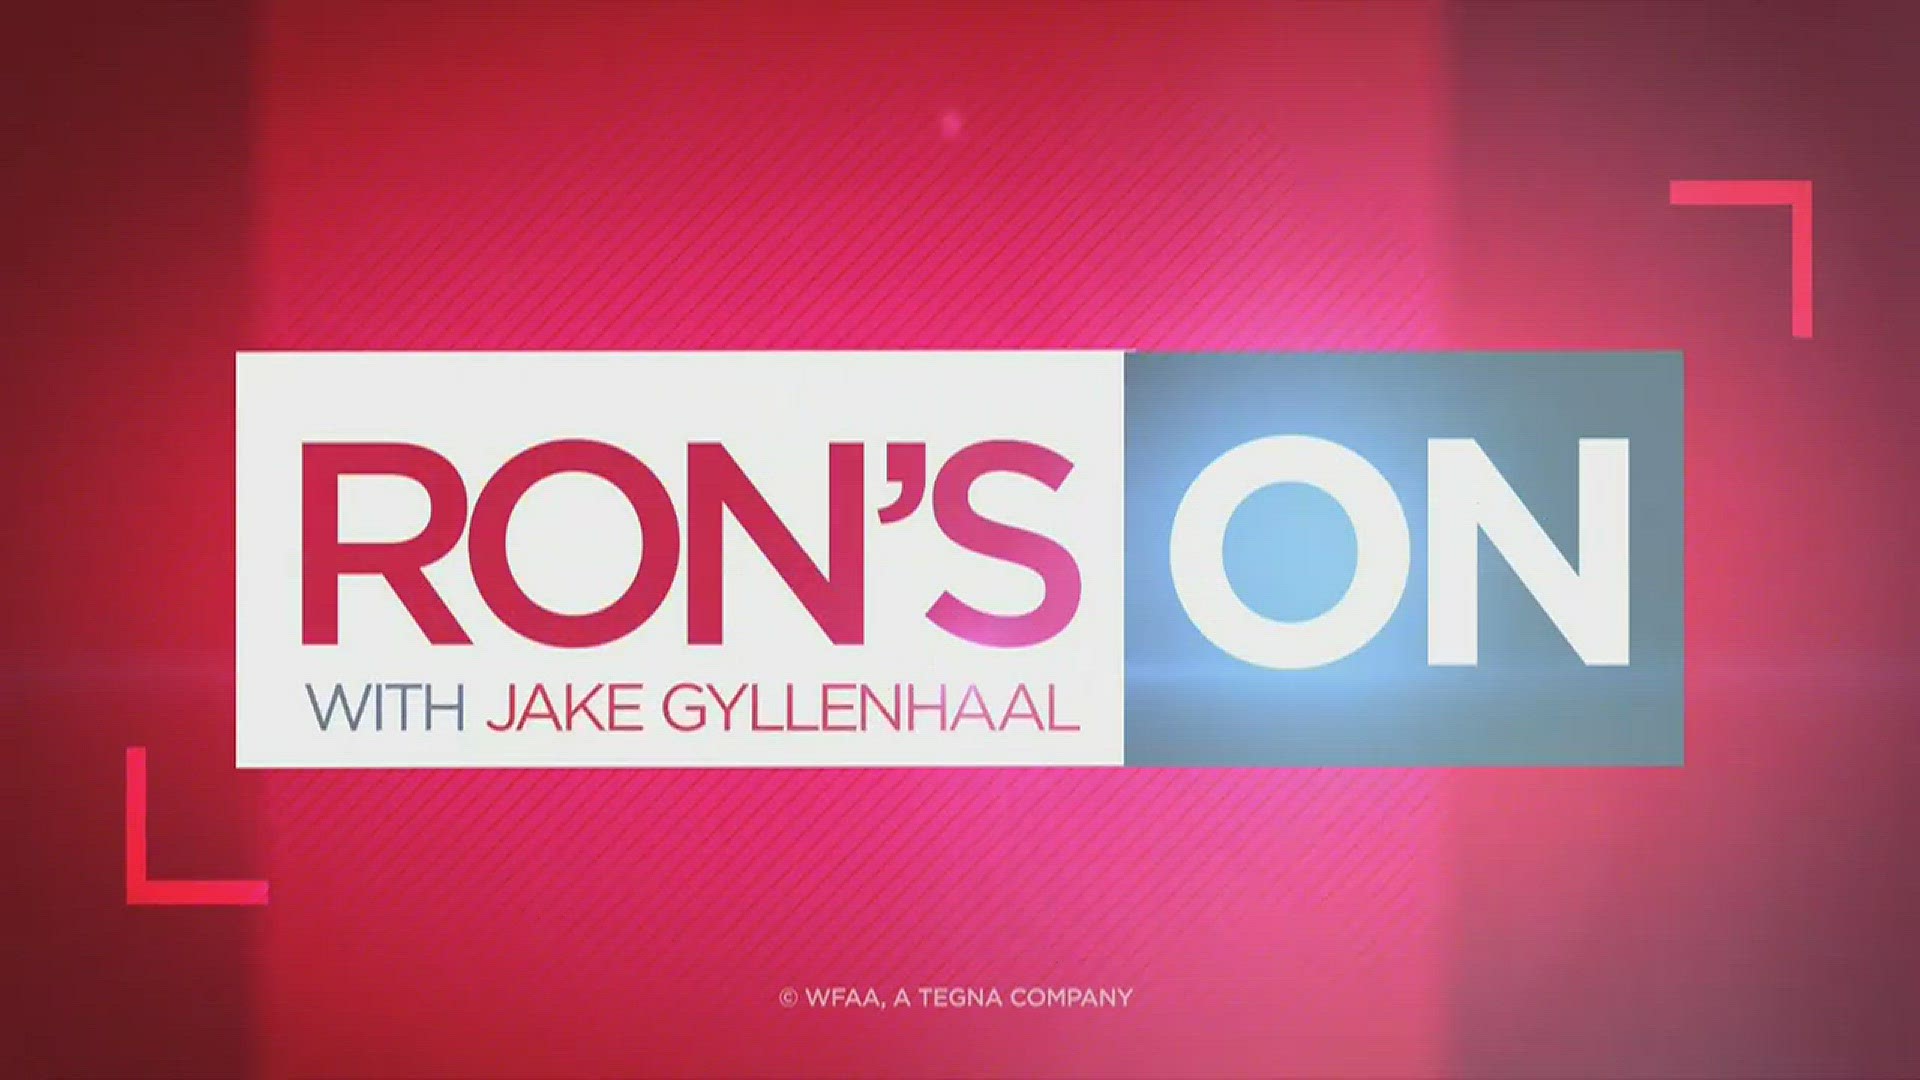 Ron's On with actor Jake Gyllenhaal and author Jeff Bauman discussing the new film "Stronger" based on Jeff's memoir about the challenges and struggles he endured after losing both legs in the Boston Marathon bombing